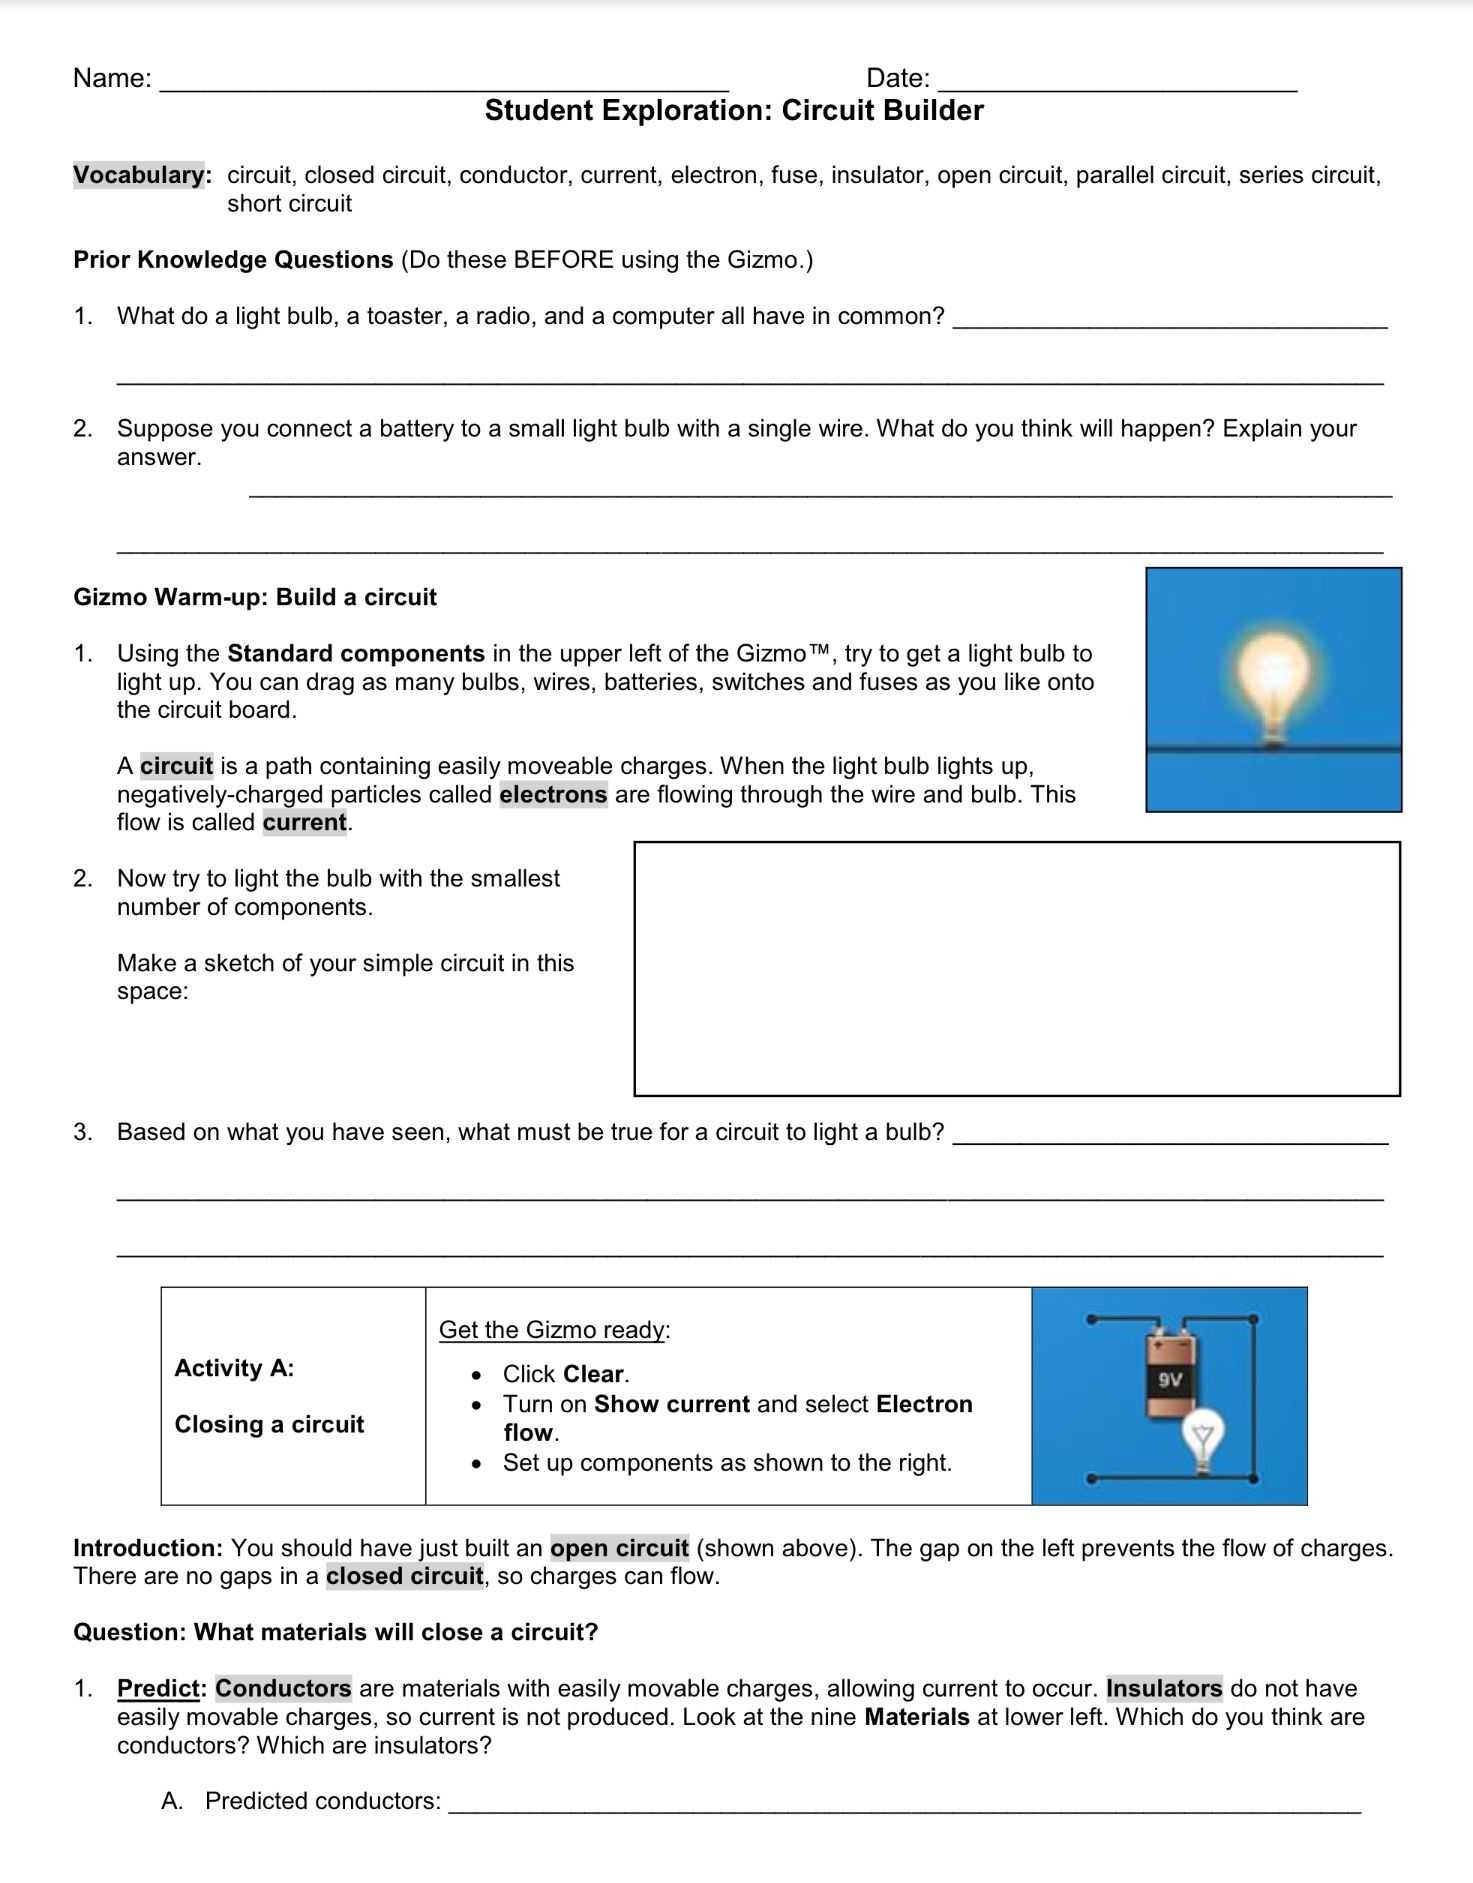 Redox Reaction Worksheet with Answers and Circuit Builder Student Exploration Gizmo